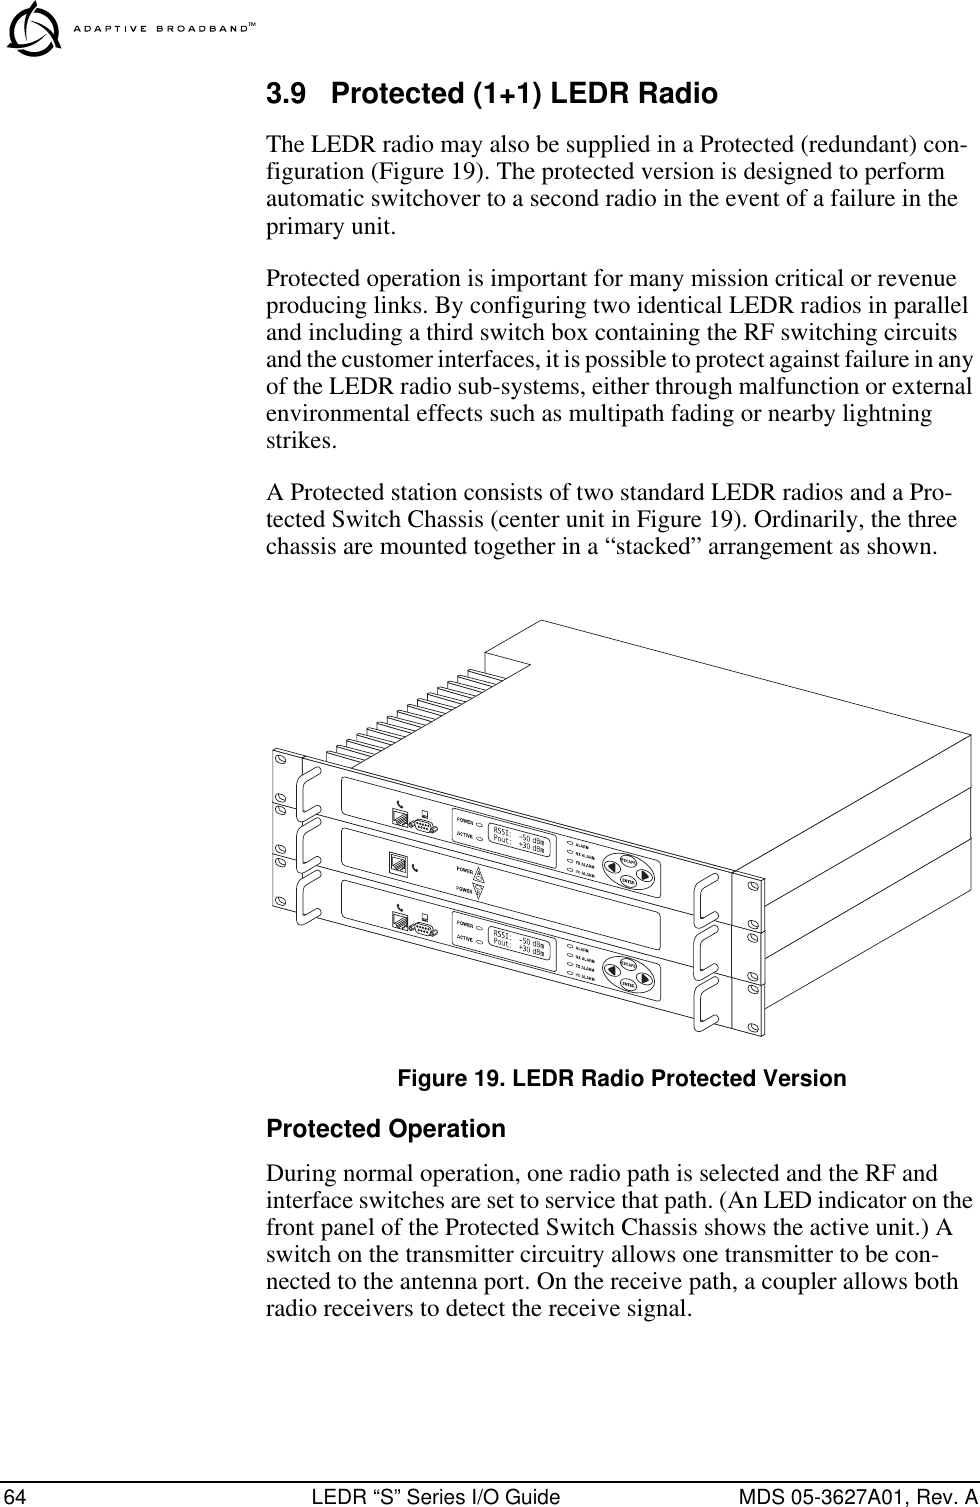 64 LEDR “S” Series I/O Guide MDS 05-3627A01, Rev. A3.9 Protected (1+1) LEDR RadioThe LEDR radio may also be supplied in a Protected (redundant) con-figuration (Figure 19). The protected version is designed to perform automatic switchover to a second radio in the event of a failure in the primary unit.Protected operation is important for many mission critical or revenue producing links. By configuring two identical LEDR radios in parallel and including a third switch box containing the RF switching circuits and the customer interfaces, it is possible to protect against failure in any of the LEDR radio sub-systems, either through malfunction or external environmental effects such as multipath fading or nearby lightning strikes.A Protected station consists of two standard LEDR radios and a Pro-tected Switch Chassis (center unit in Figure 19). Ordinarily, the three chassis are mounted together in a “stacked” arrangement as shown.Invisible place holderFigure 19. LEDR Radio Protected VersionProtected OperationDuring normal operation, one radio path is selected and the RF and interface switches are set to service that path. (An LED indicator on the front panel of the Protected Switch Chassis shows the active unit.) A switch on the transmitter circuitry allows one transmitter to be con-nected to the antenna port. On the receive path, a coupler allows both radio receivers to detect the receive signal.